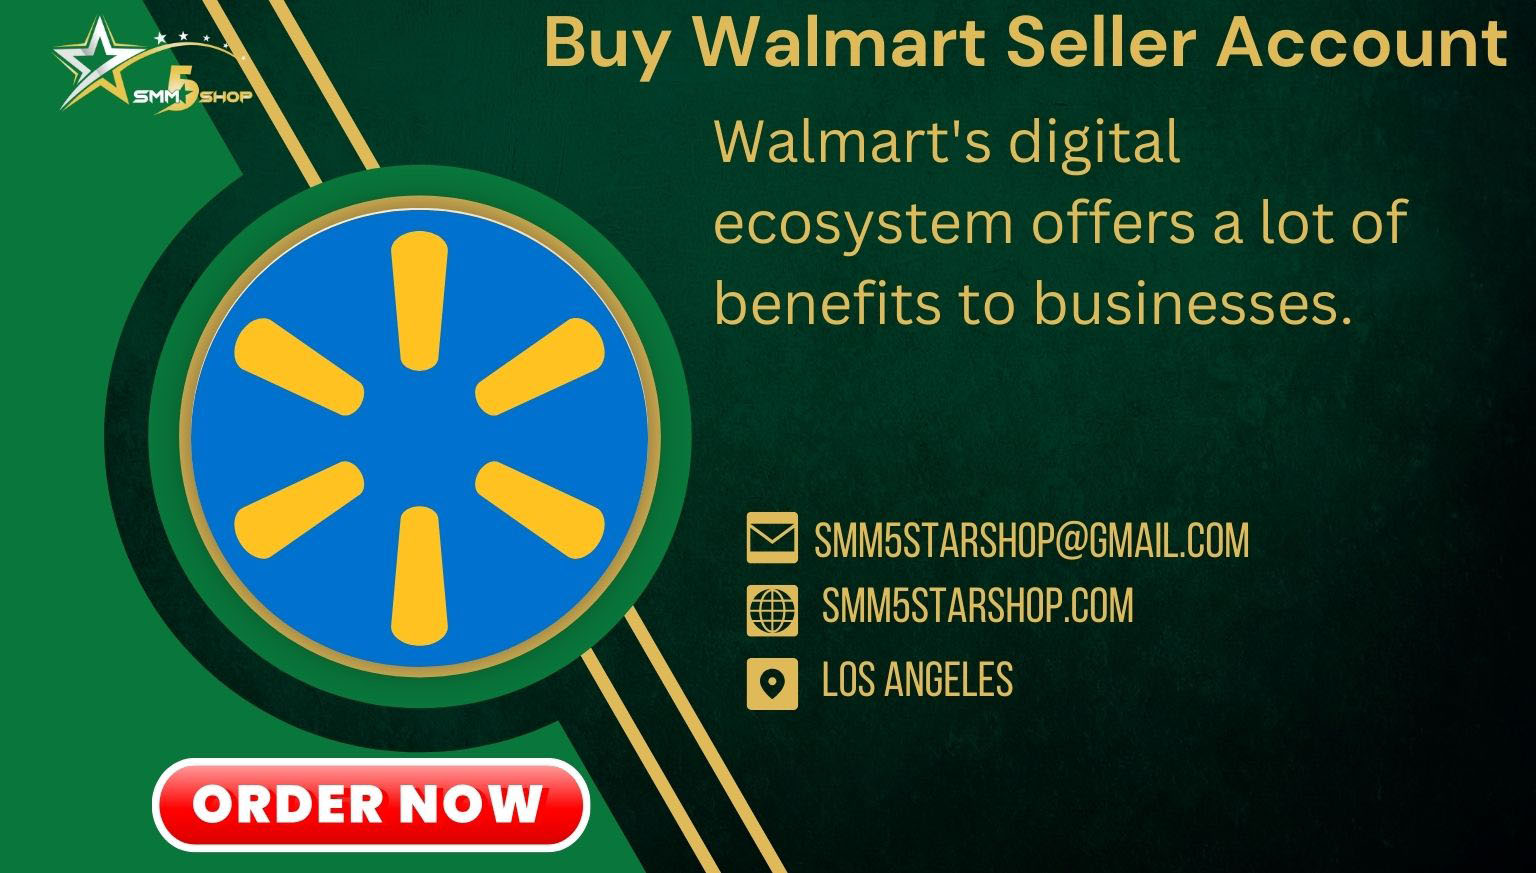 Buy Walmart seller account at smm5starshop.com. We provide email, number, passport, EIN, Tax ID, LLC (certificate for incorporation) approved accounts at cheap price.